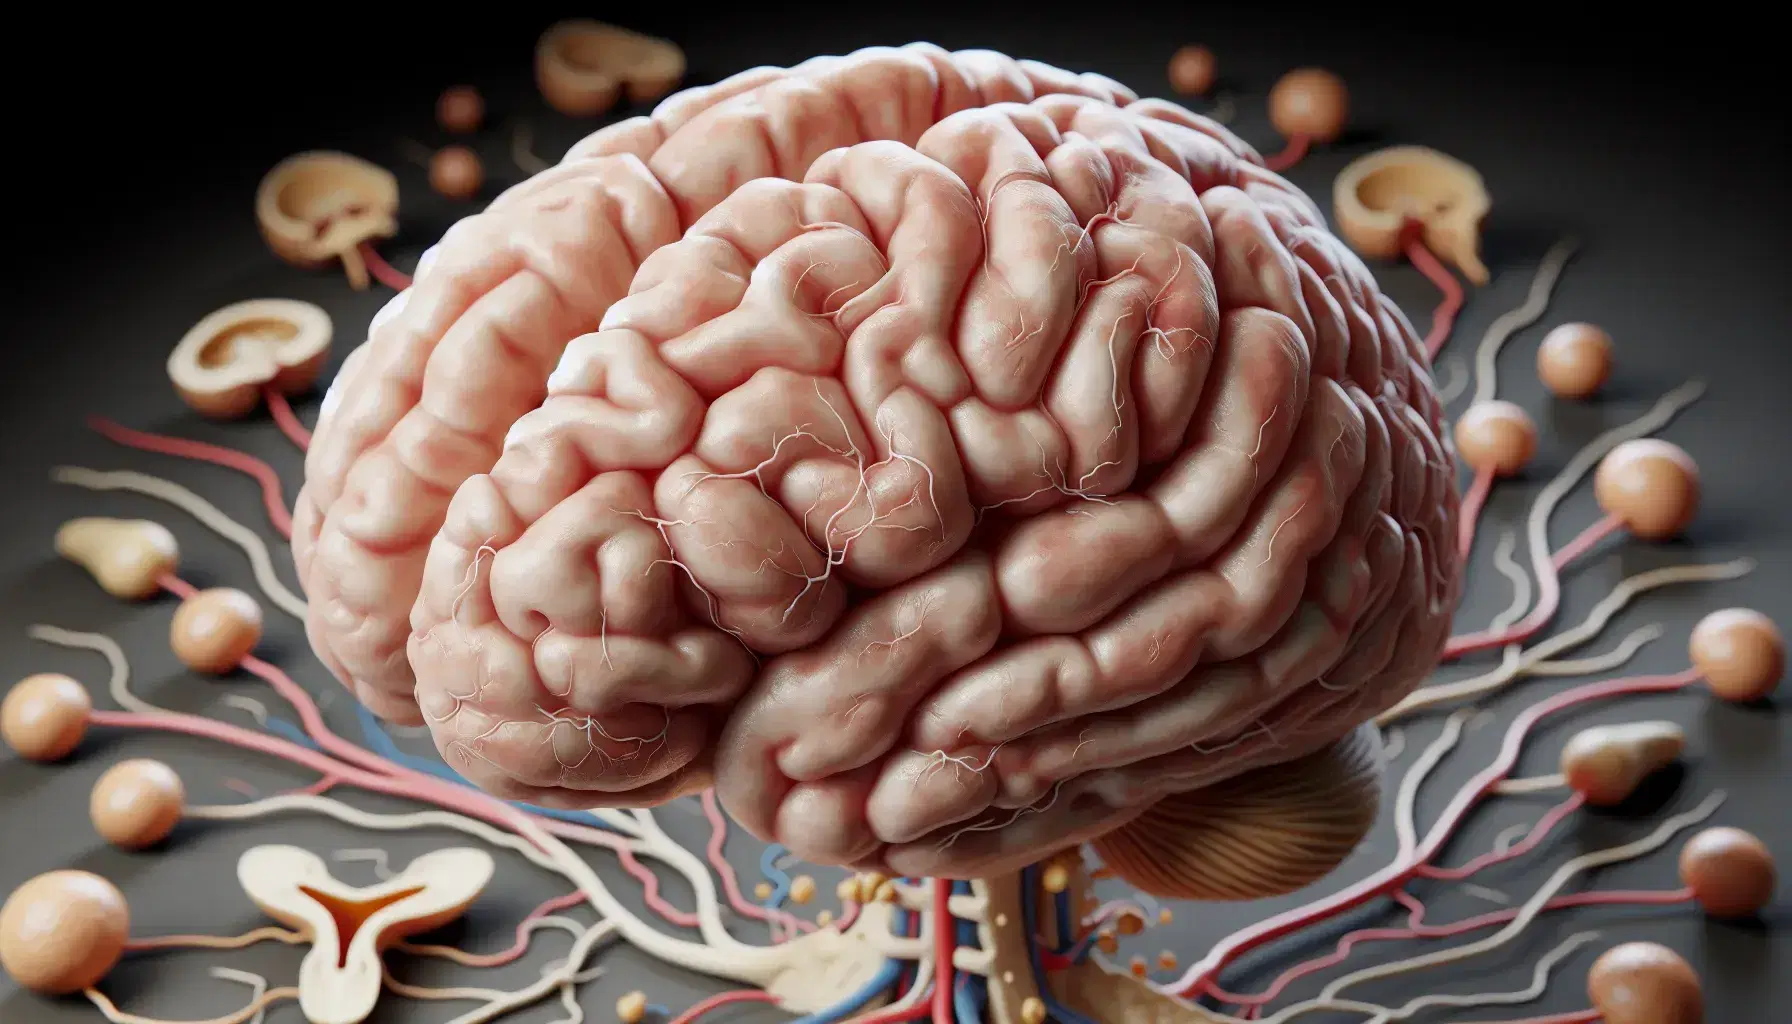 Detailed model of the human brain with highlighted hypothalamus and brainstem, surrounded by adrenal glands connected by blood vessels.